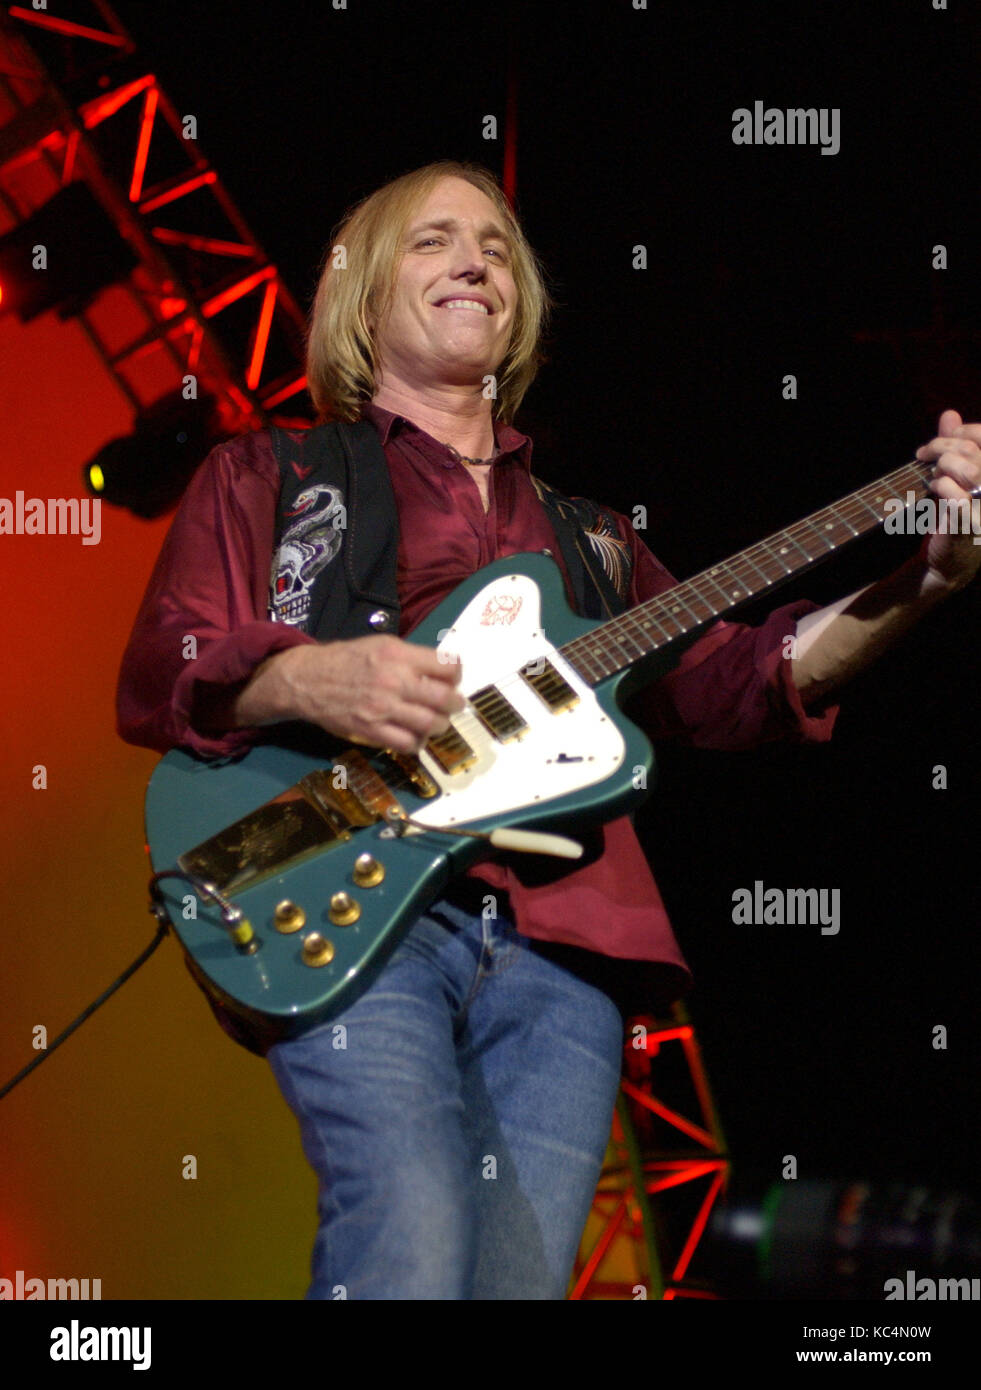 Portsmouth, VA, USA. 12th Aug, 2003. TOM PETTY of TOM PETTY & THE HEARTBREAKERS blows away the crowd at Netelos Pav. in Portsmouth Va. on 12 August 2003. Credit: Jeff Moore/ZUMA Wire/Alamy Live News Stock Photo